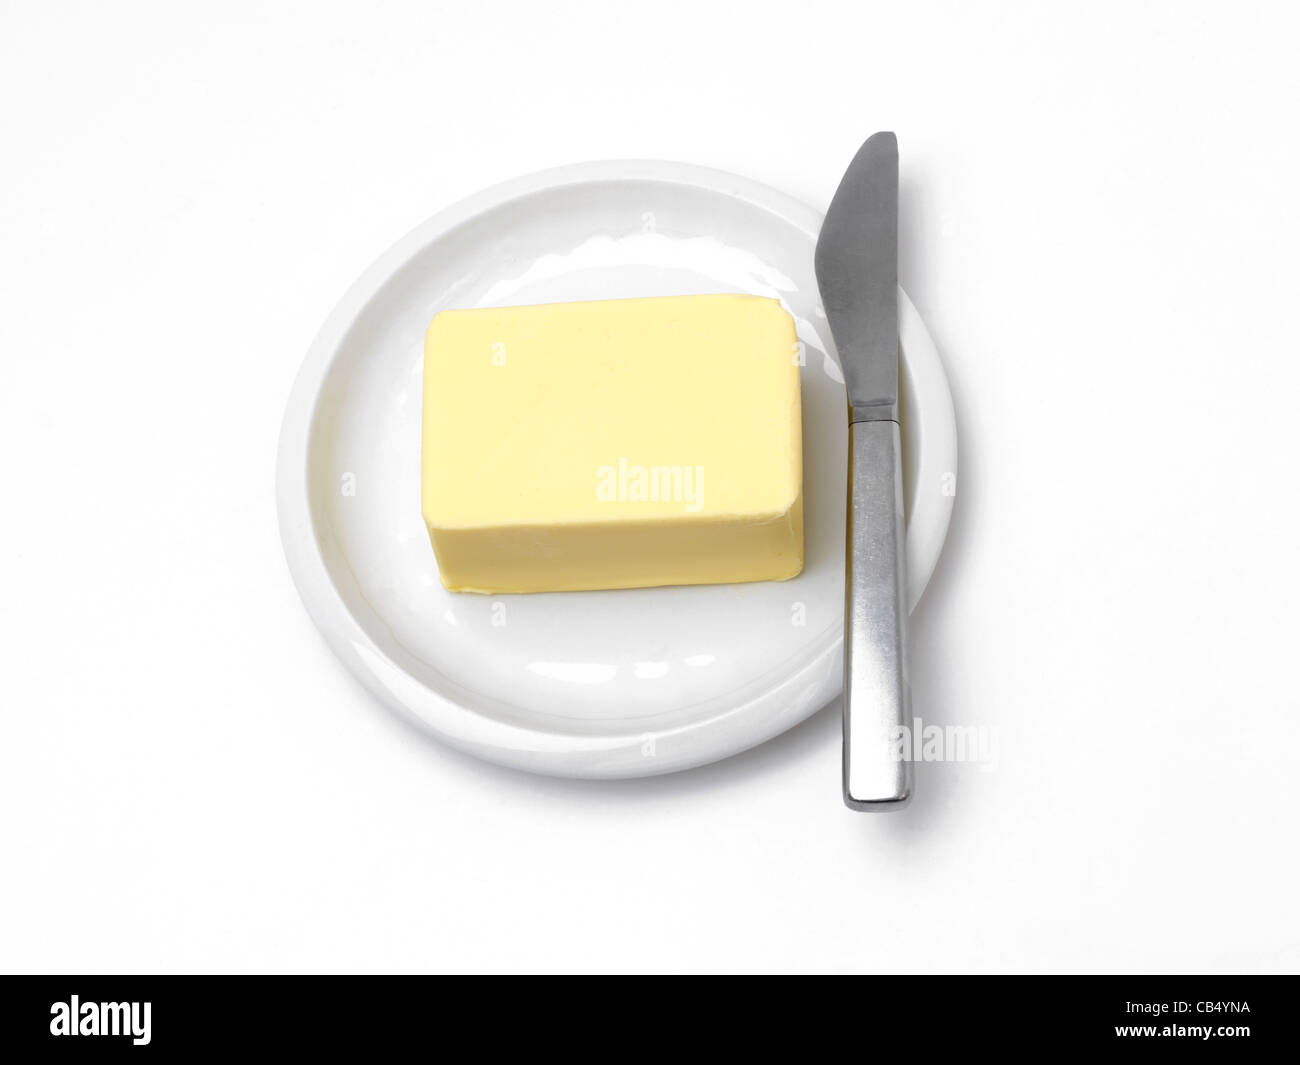 Block Of Butter On A Plate With A Knife By The Side Stock Photo